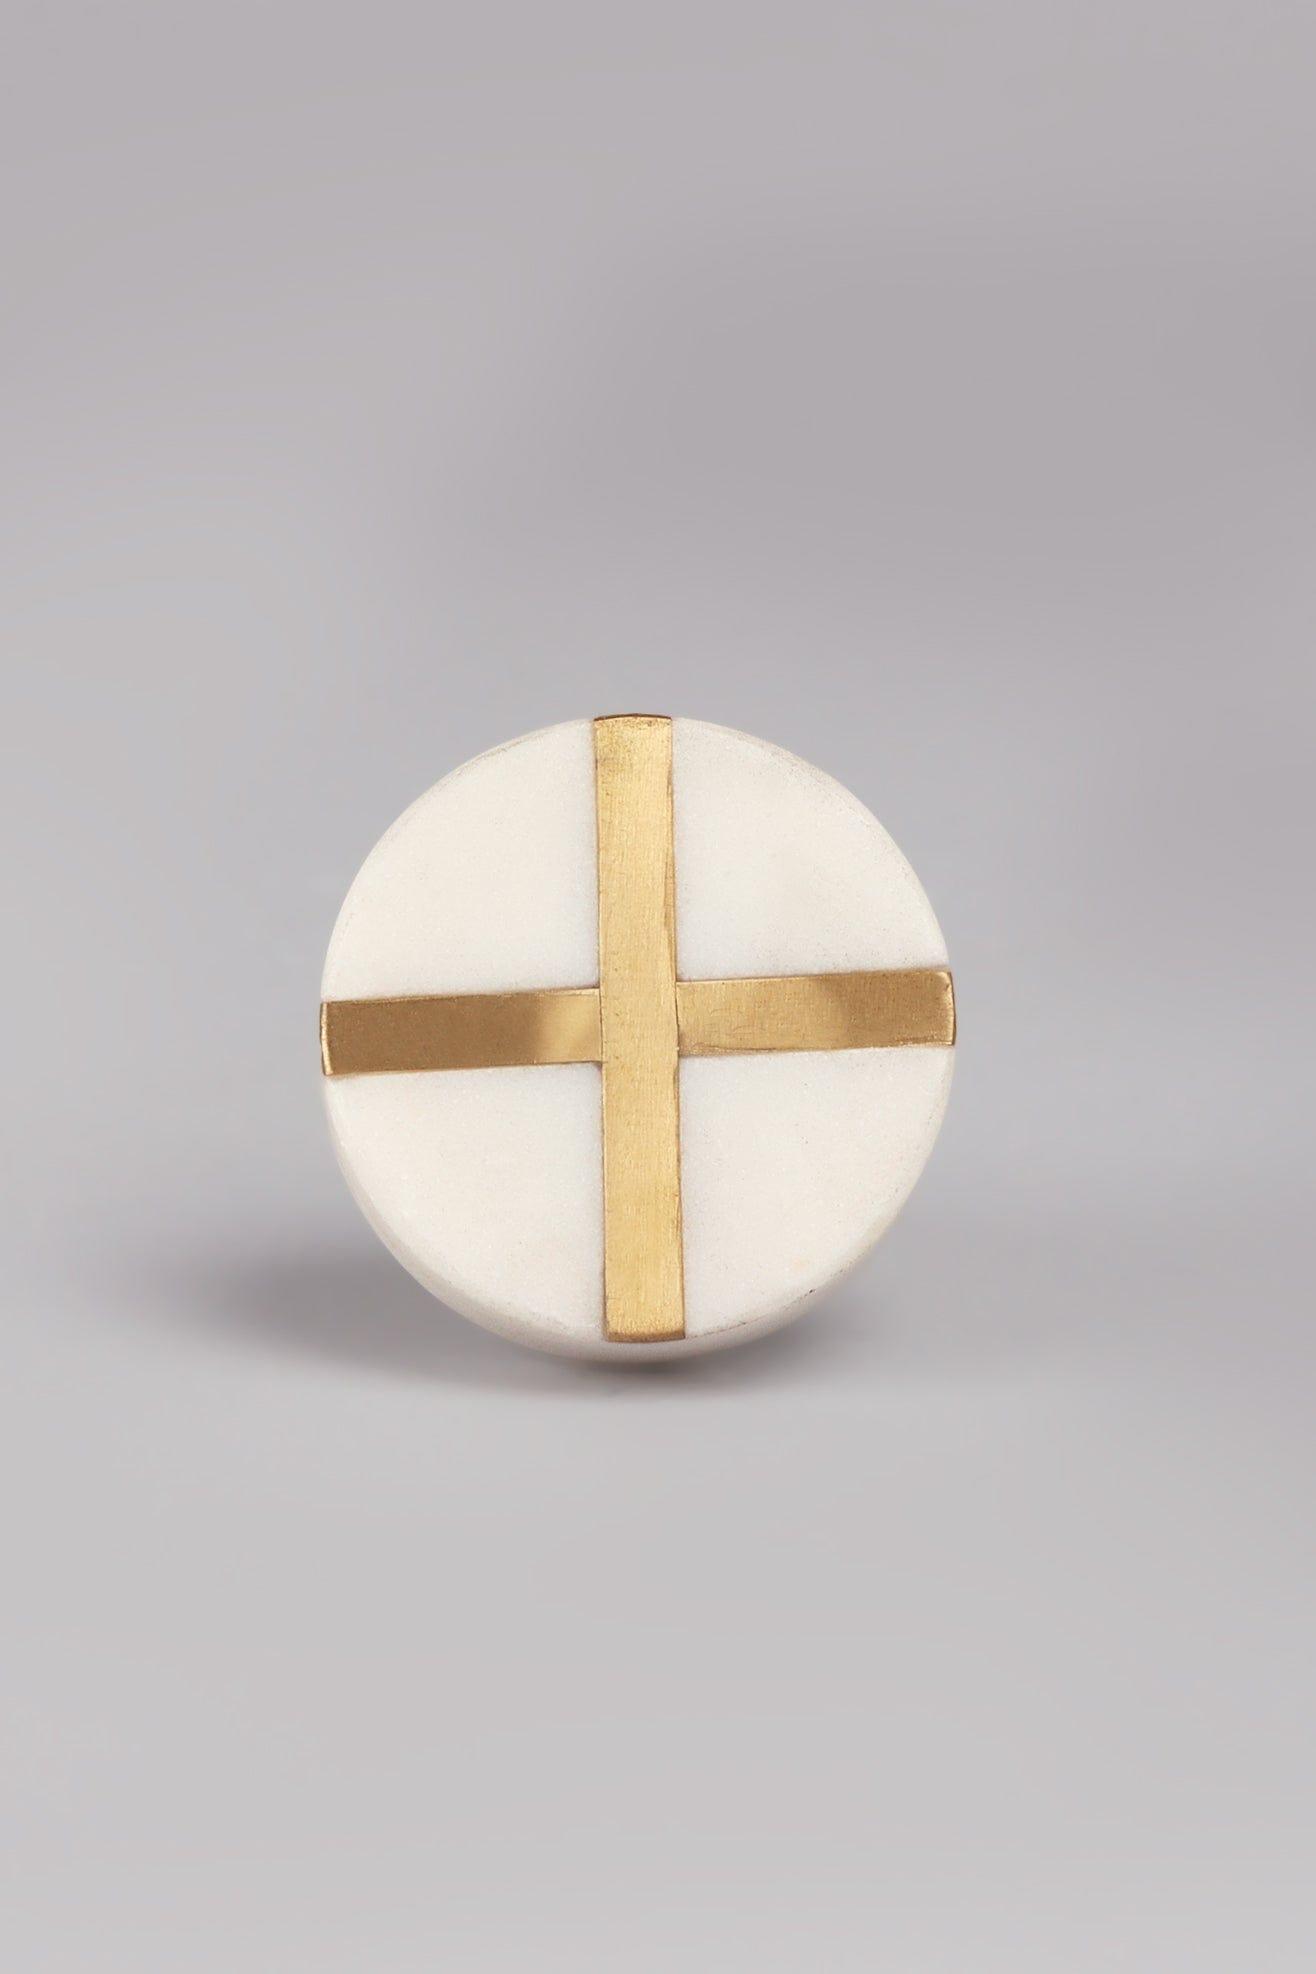 G Decor Cabinet Knobs & Handles White with cross / White Estella Marble with Brass Round Pull Knobs